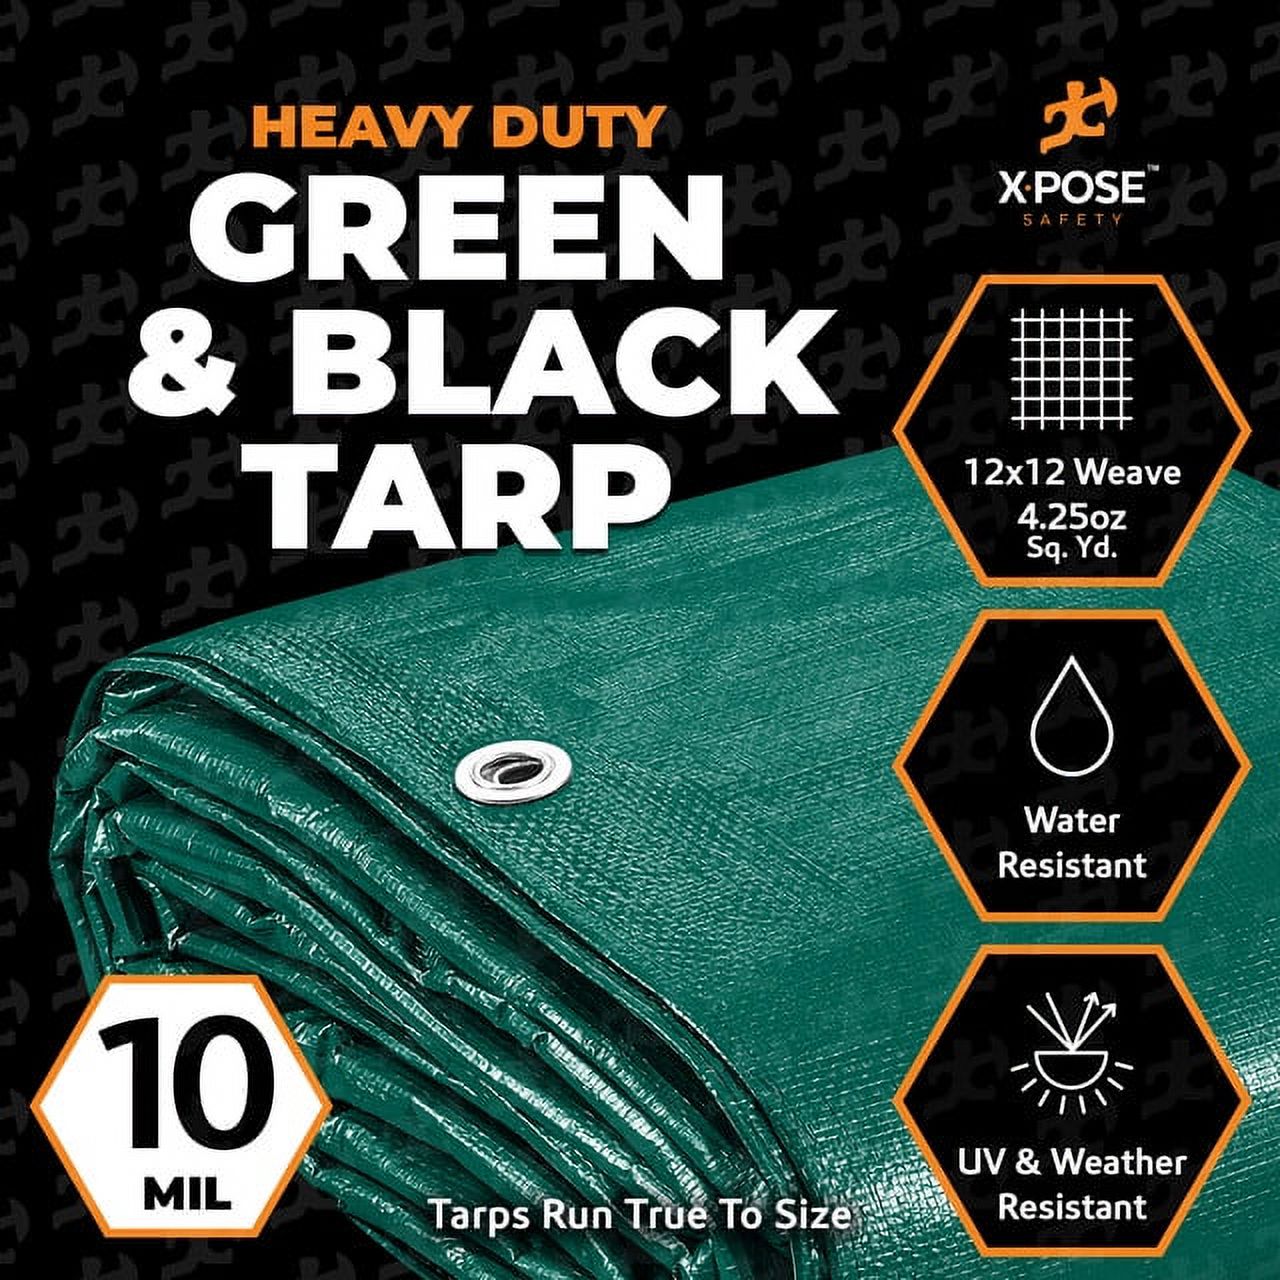 Heavy Duty Poly Tarp 9 Feet x 12 Feet 10 Mil Thick Waterproof, UV Blocking Protective Cover - Reversible Green and Black - Laminated Coating - Rustproof Grommets - by Xpose Safety - image 2 of 8